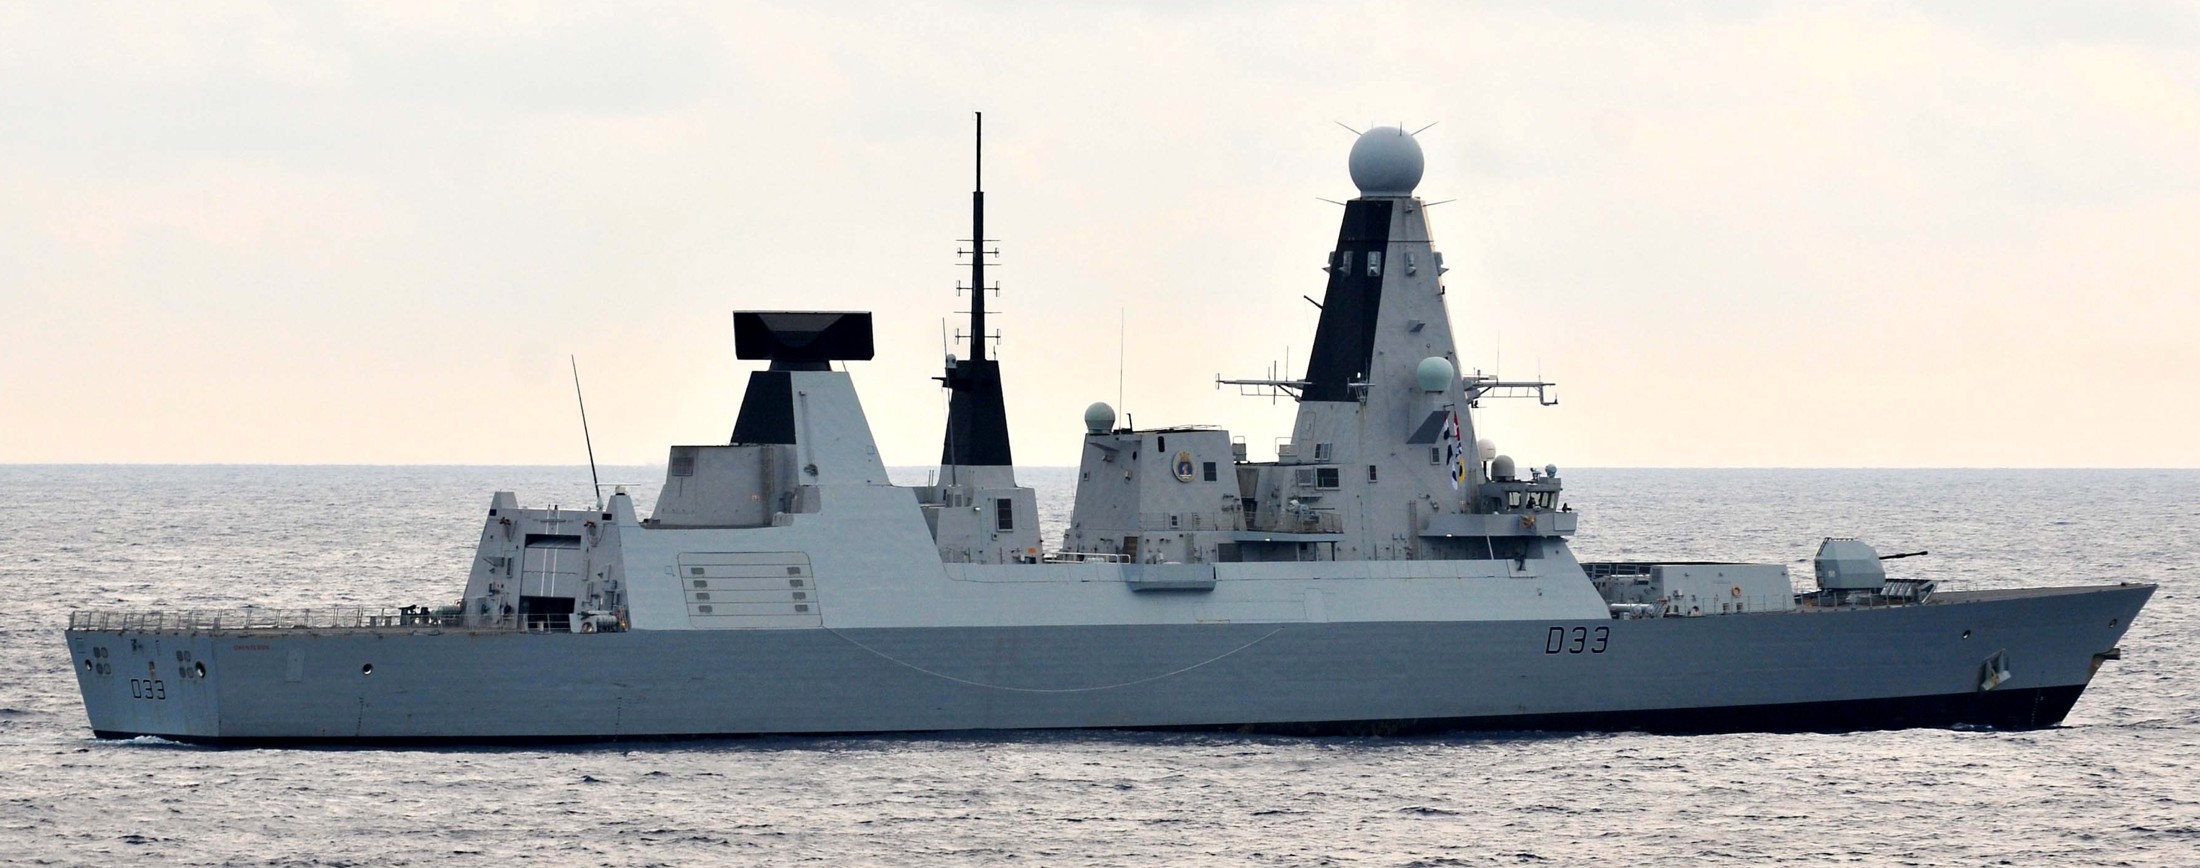 hms dauntless d-33 type 45 daring class guided missile destroyer royal navy sea viper paams 05